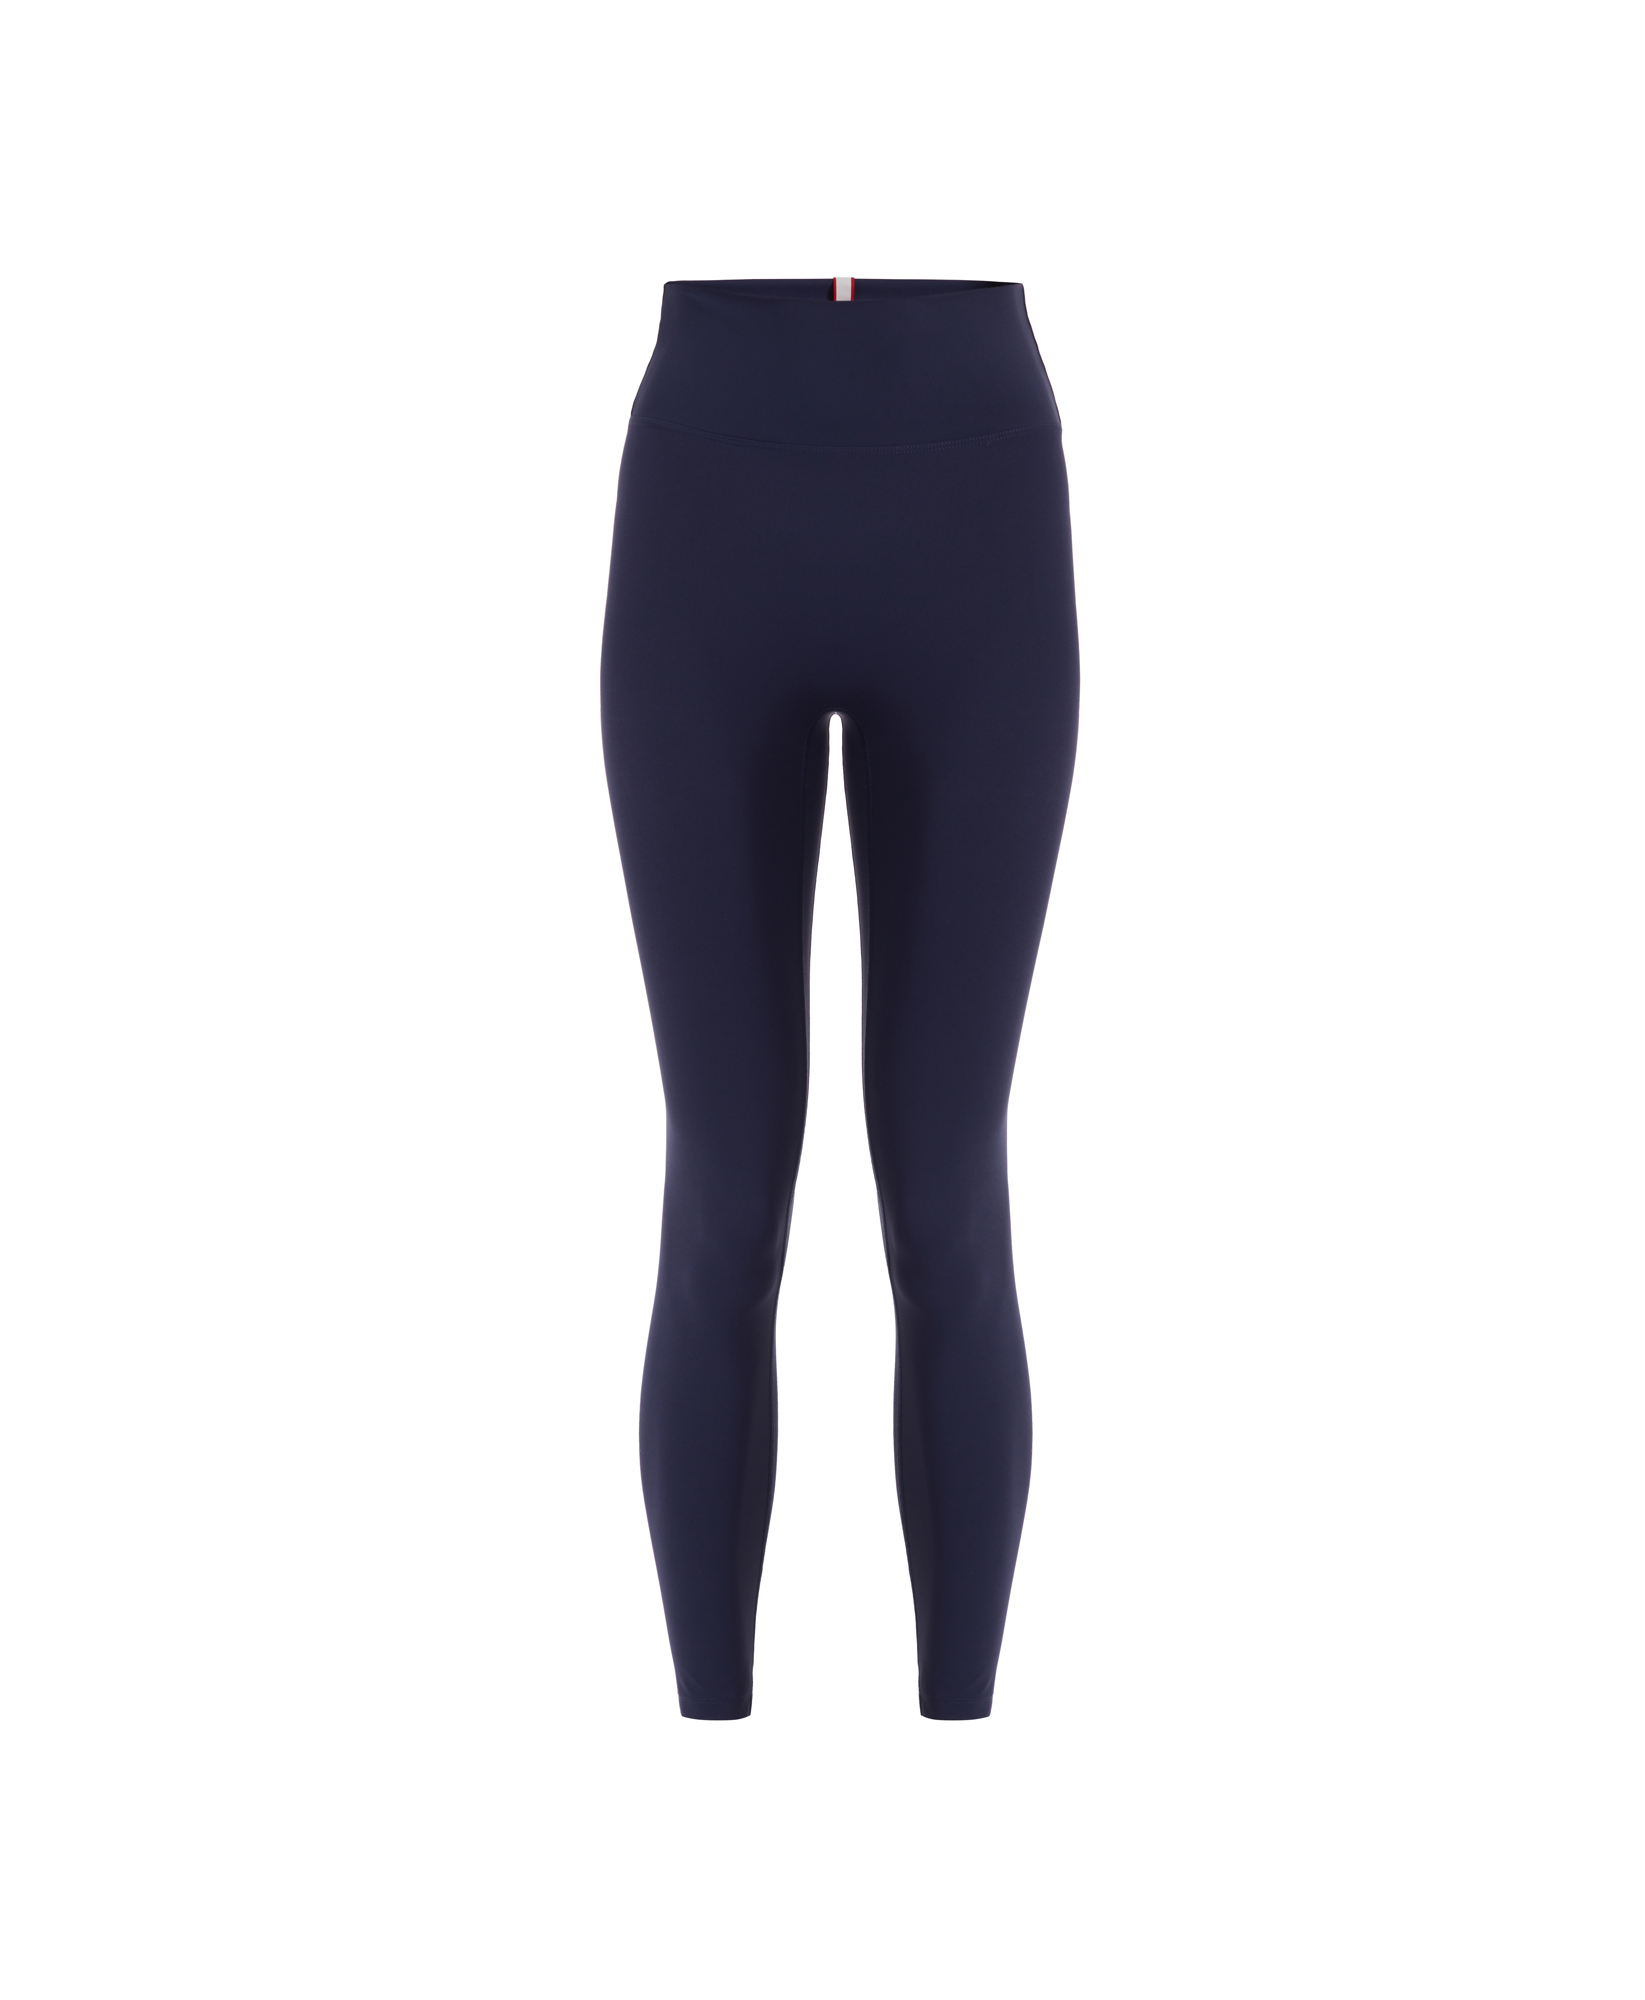 Wear One's At Routine Legging in navy on ghost mannequin front view